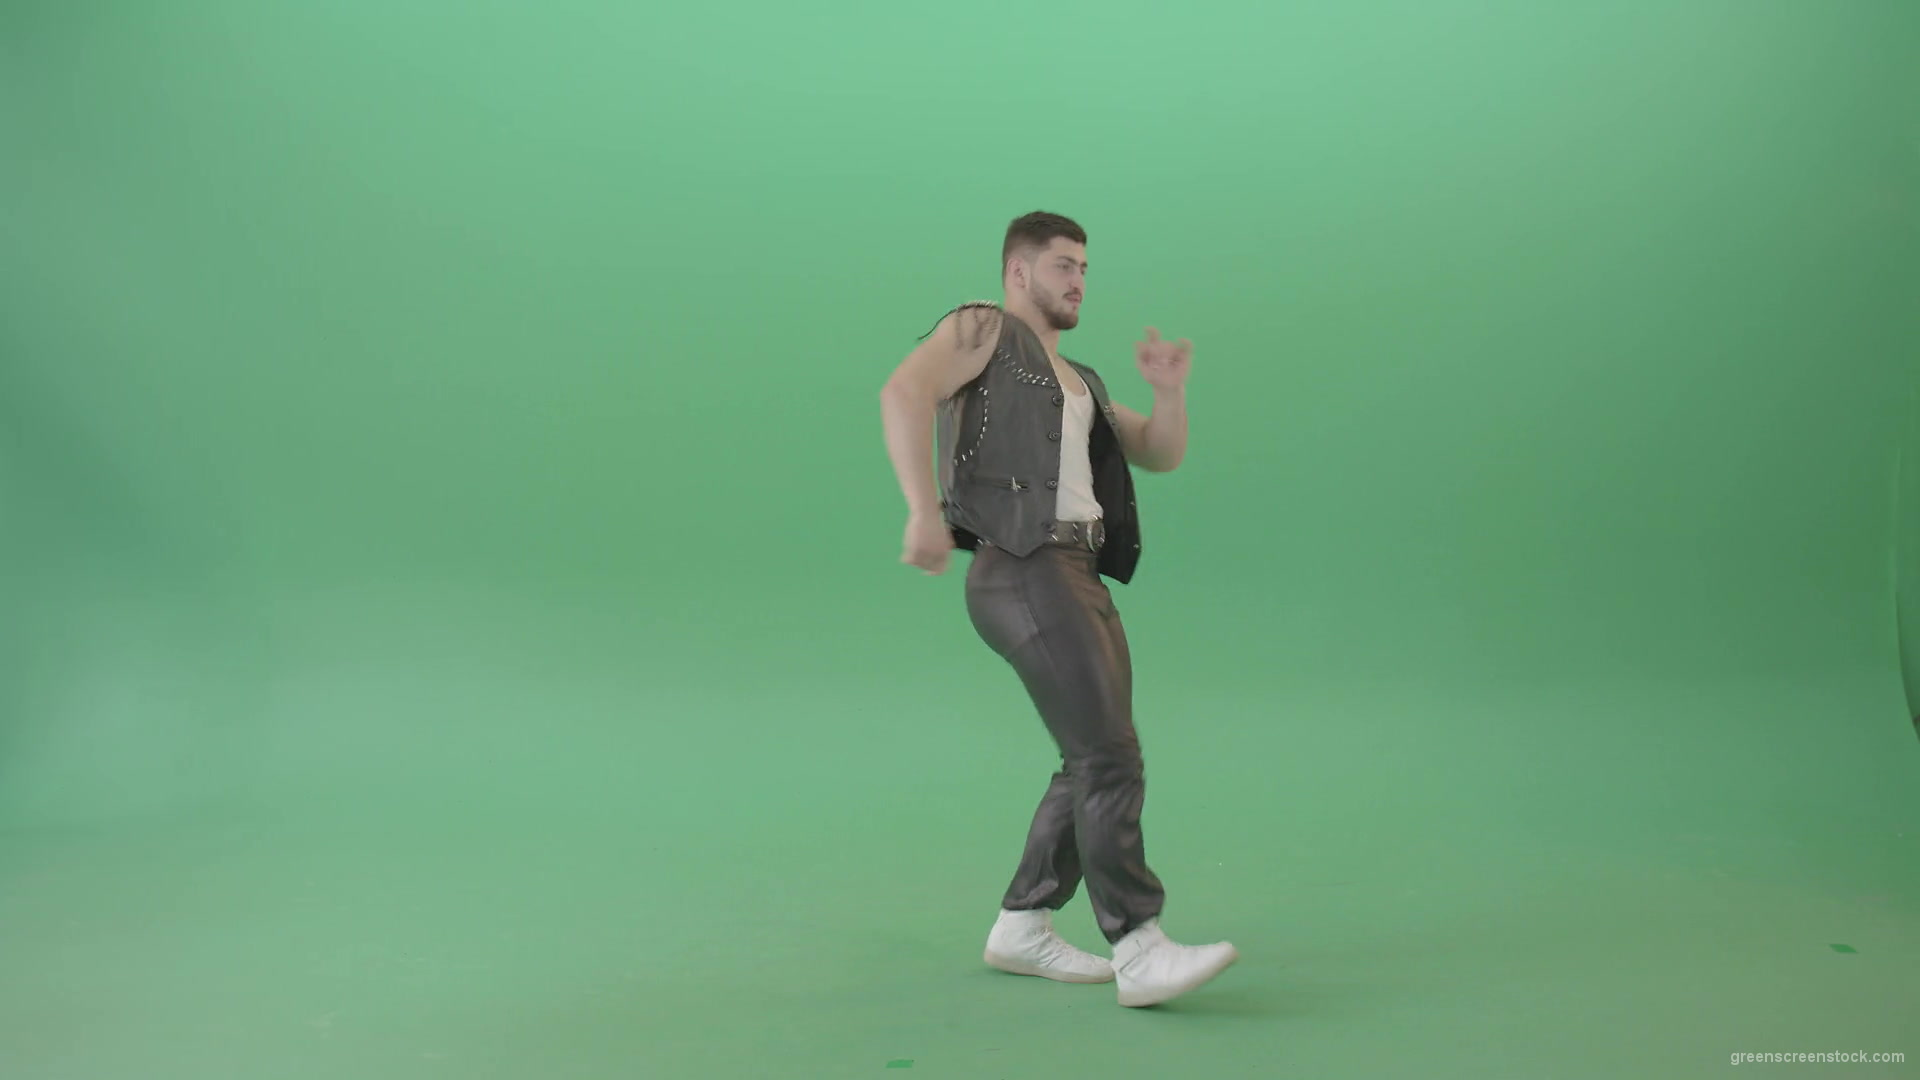 Angry-caucasian-Man-in-Black-leather-costume-dancing-Pop-Moves-on-Green-Screen-4K-Video-Footage-1920_006 Green Screen Stock